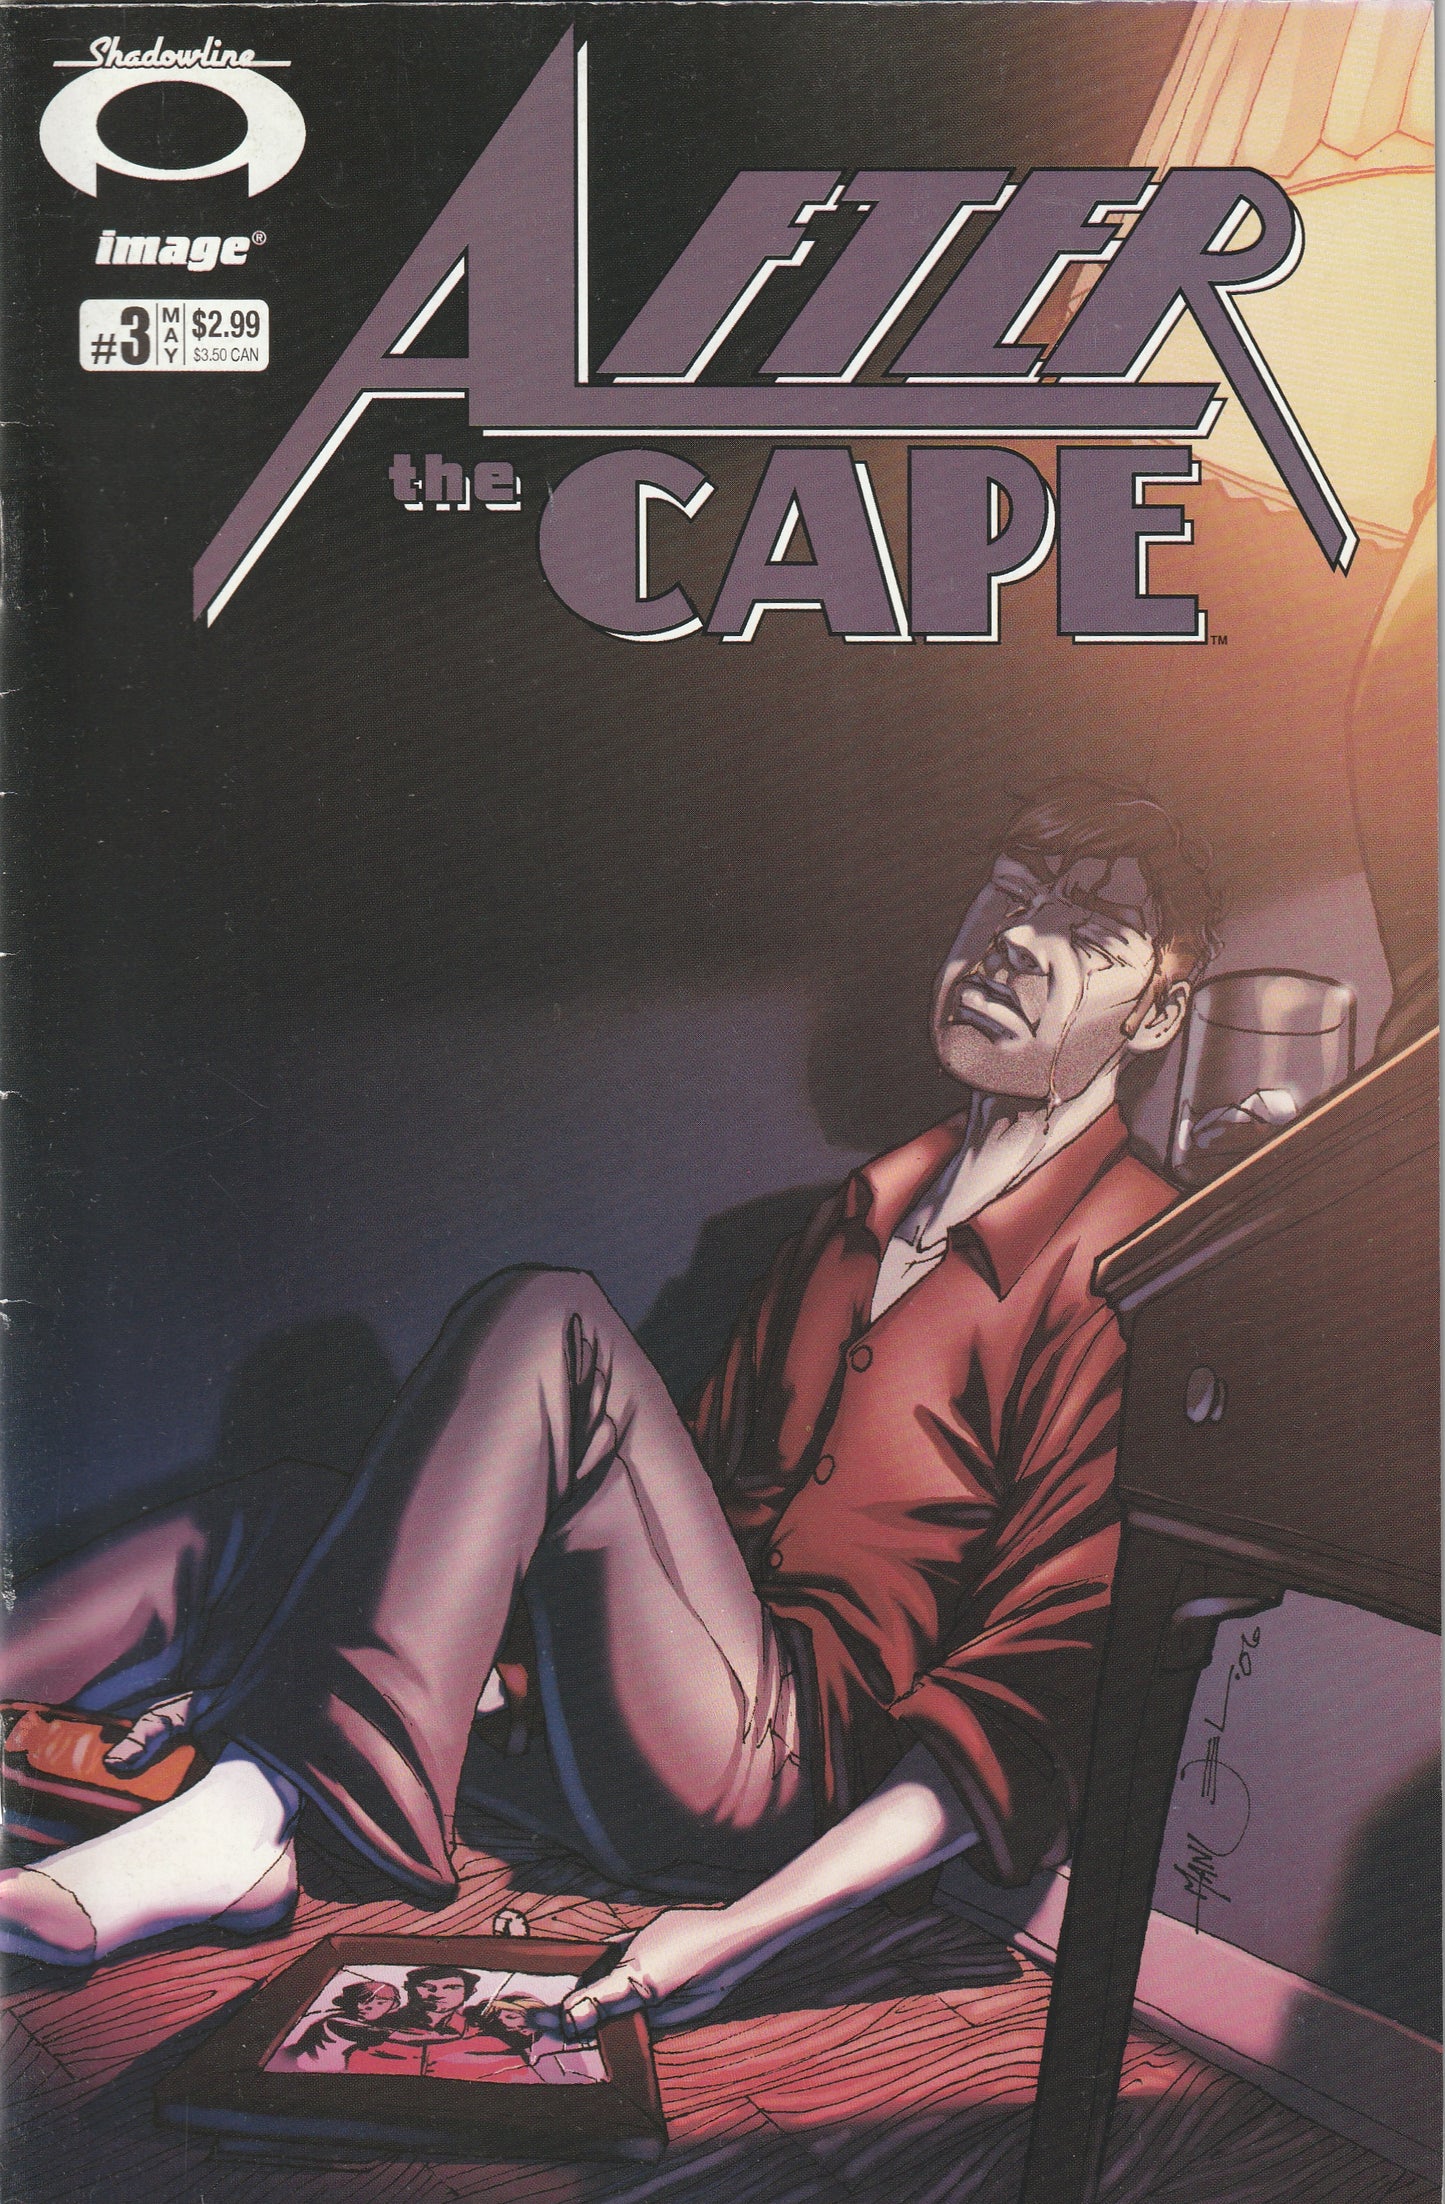 After the Cape #3 (2007) - Jim Valentino